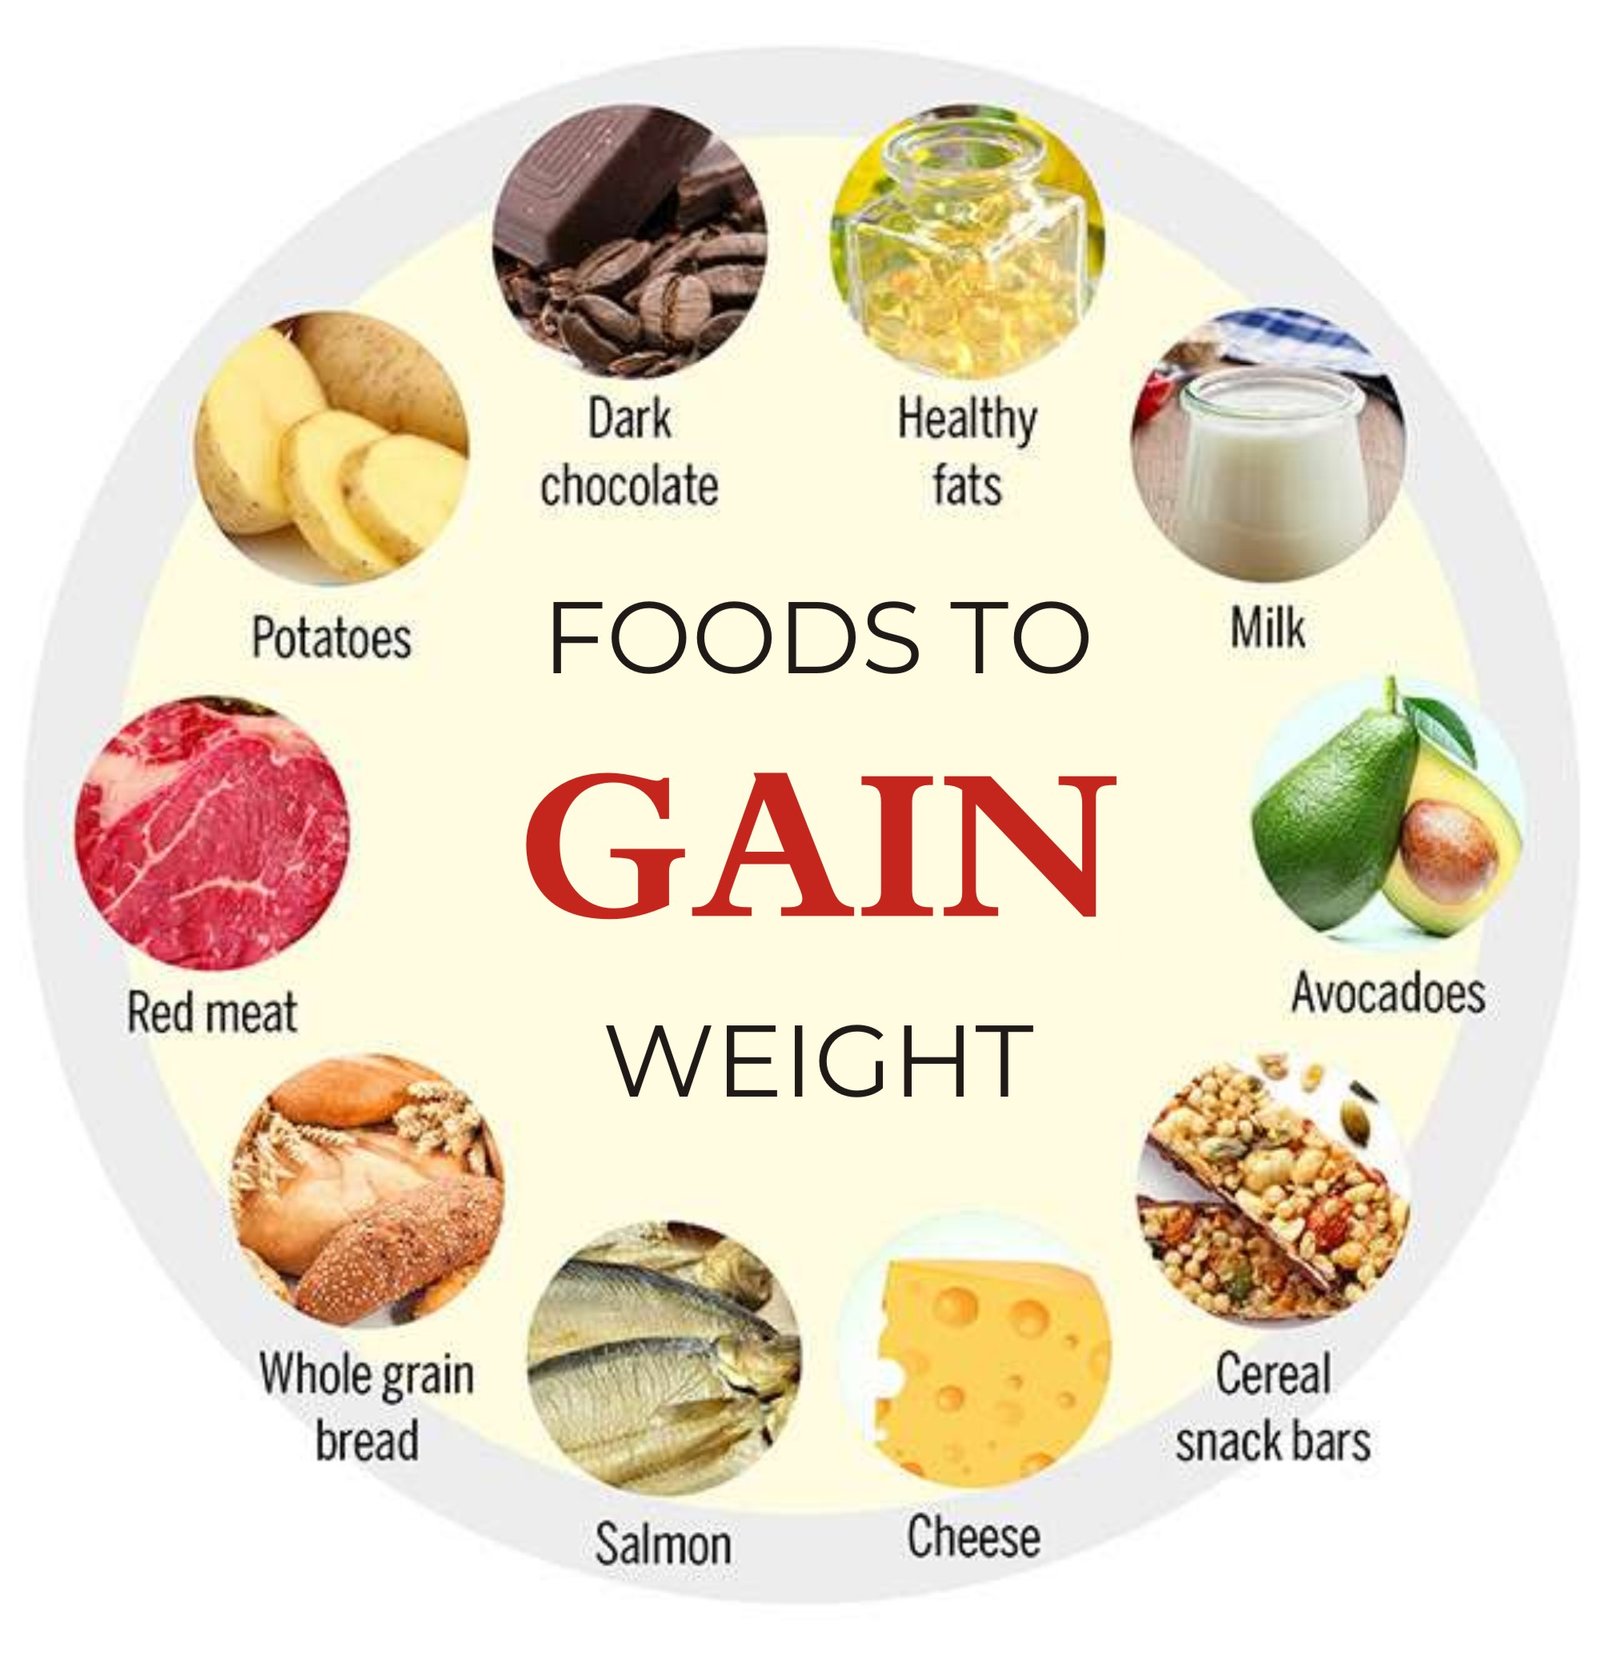 Foods to gain weight